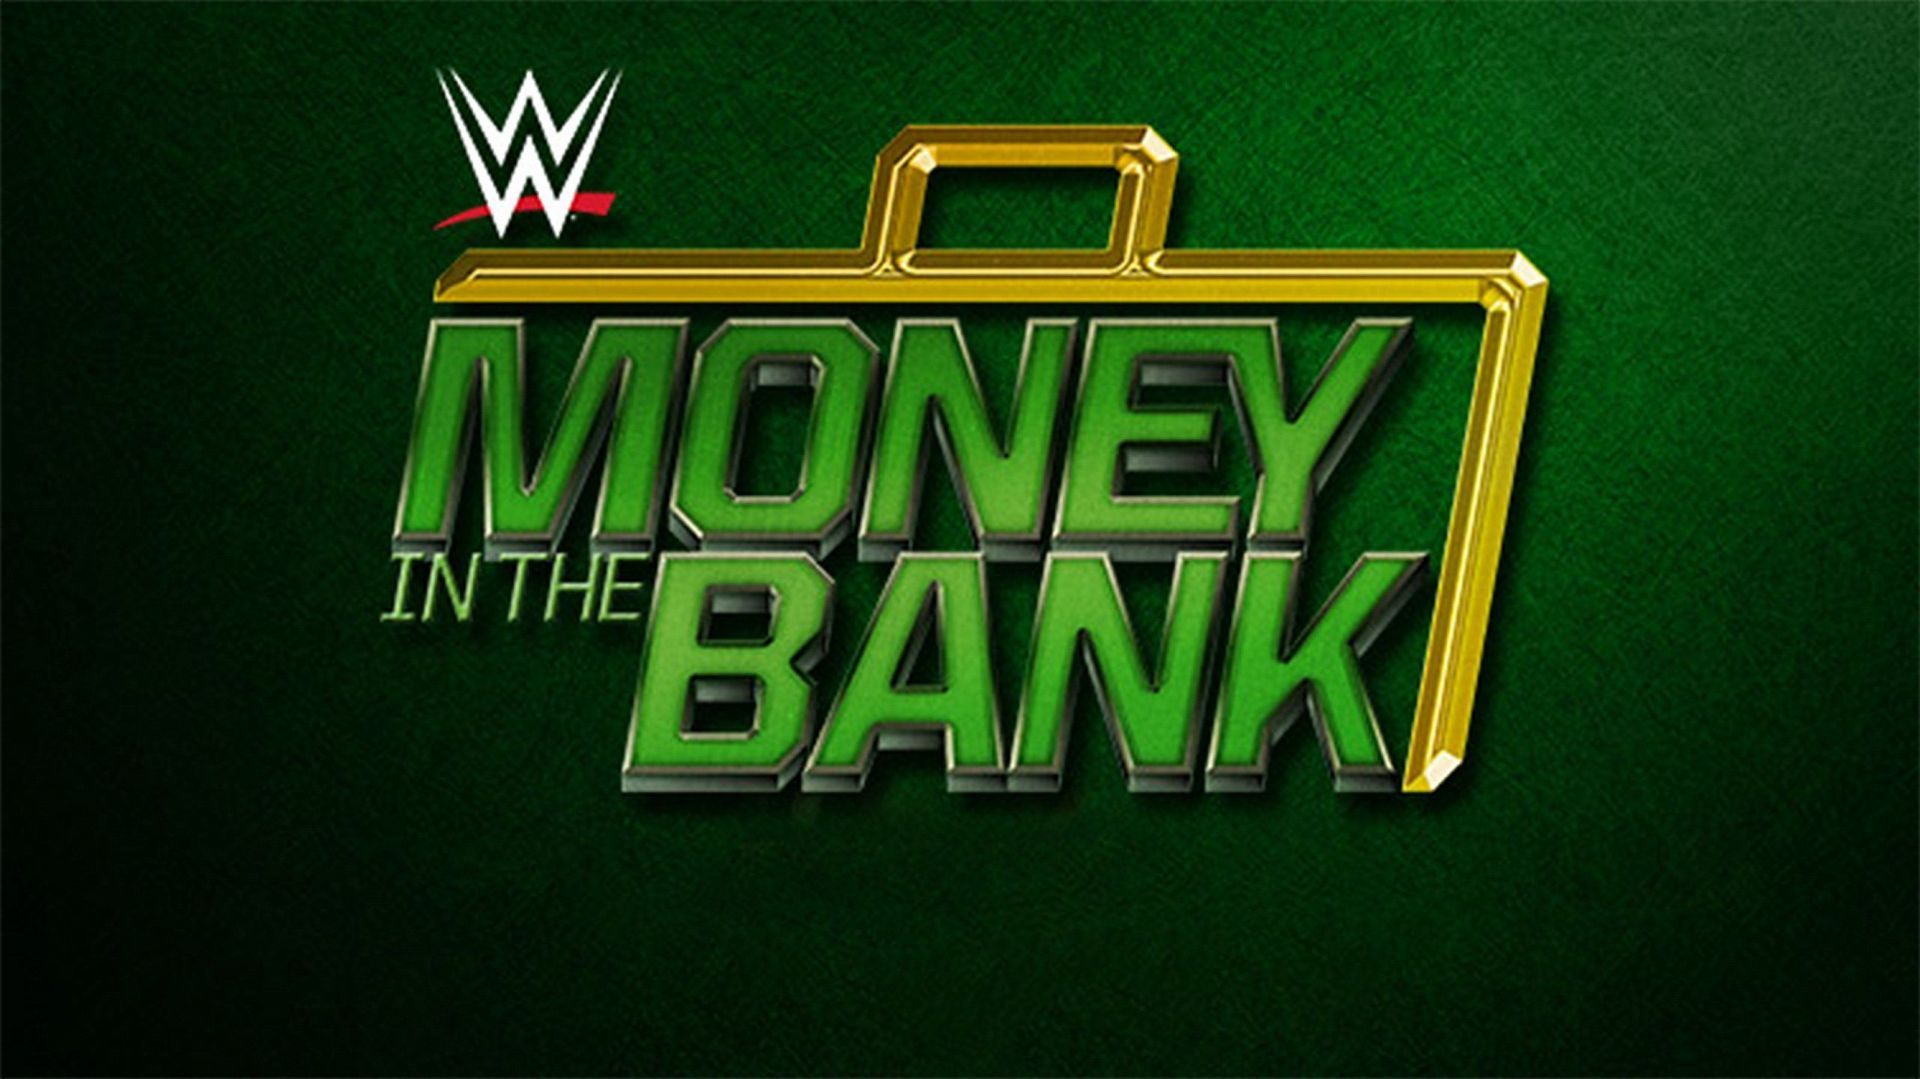 WWE Money in the Bank takes place Saturday, July 2nd from Las Vegas, NV